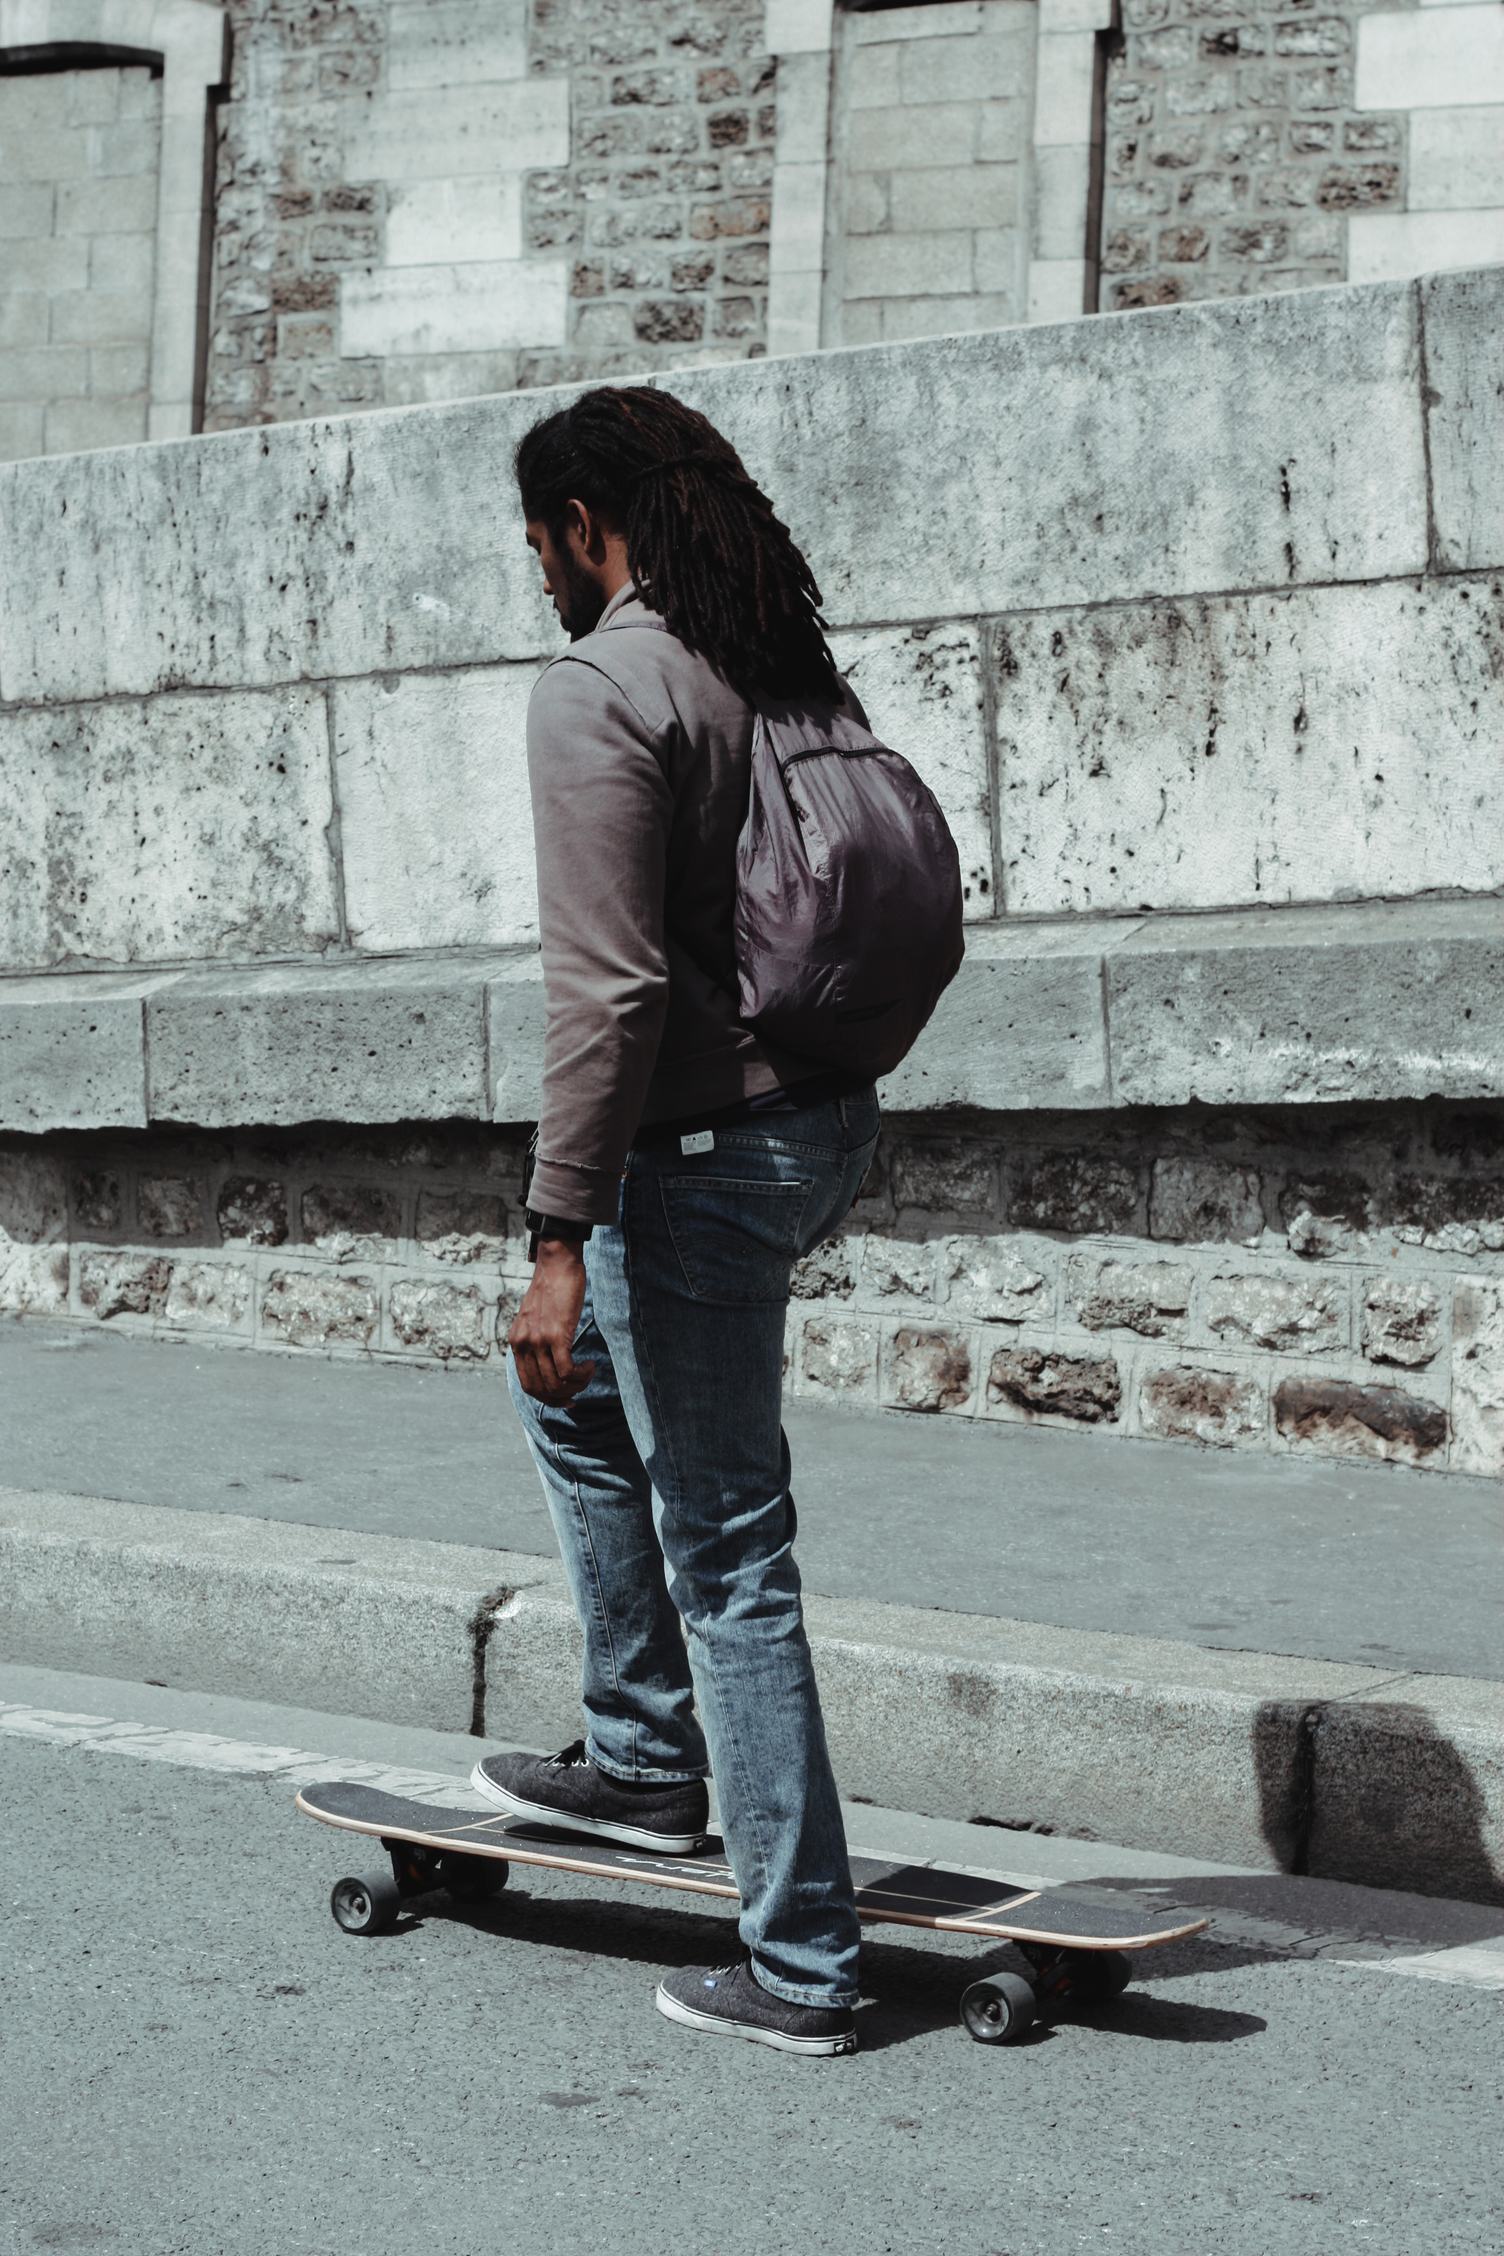 Young Black Man with Dreadlocks Getting on his Skateboard